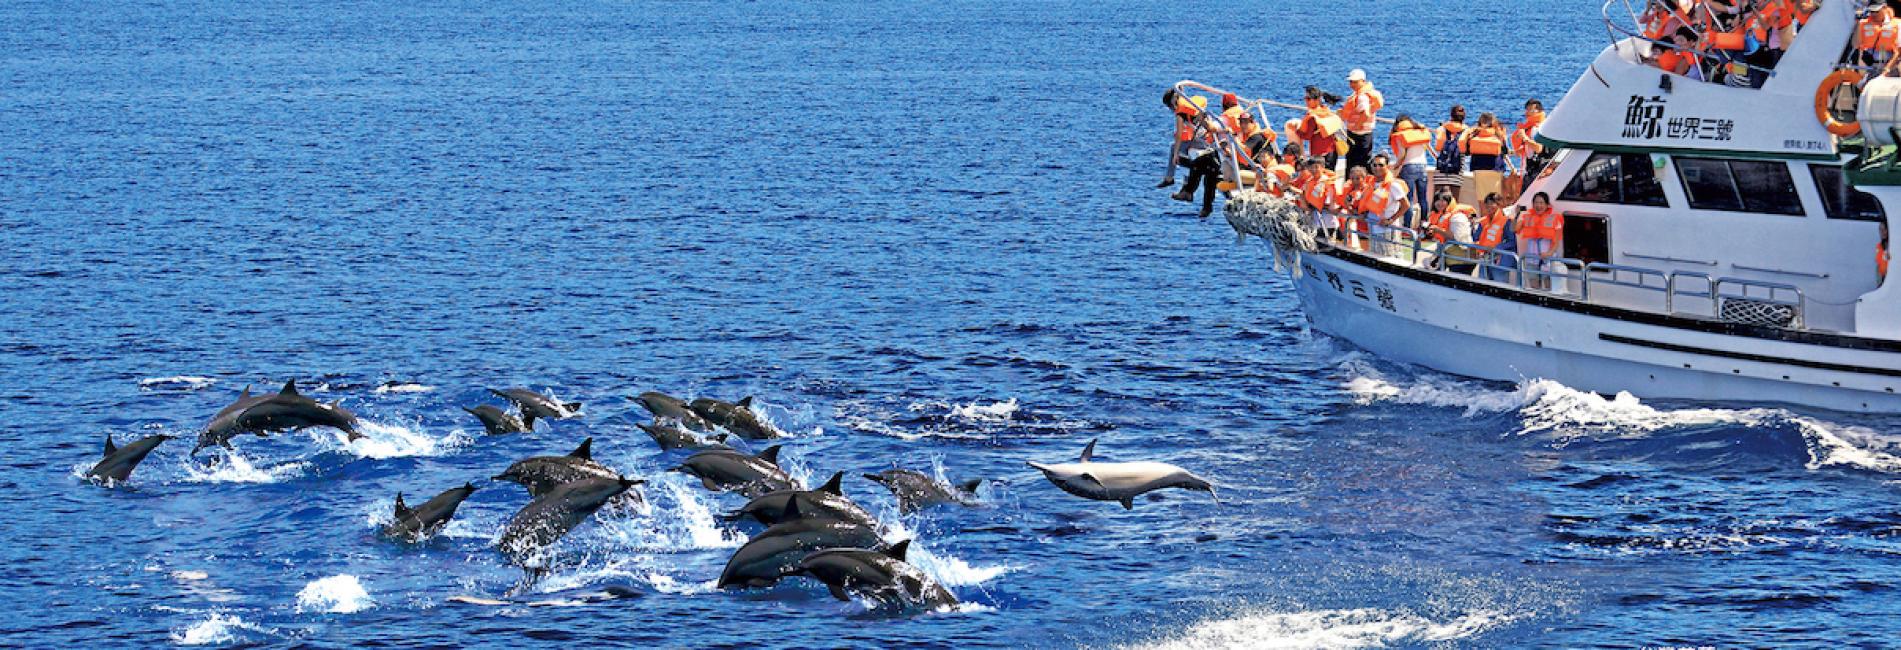 [Super Value Combination Package] Hualien Whale Watching｜Whale World